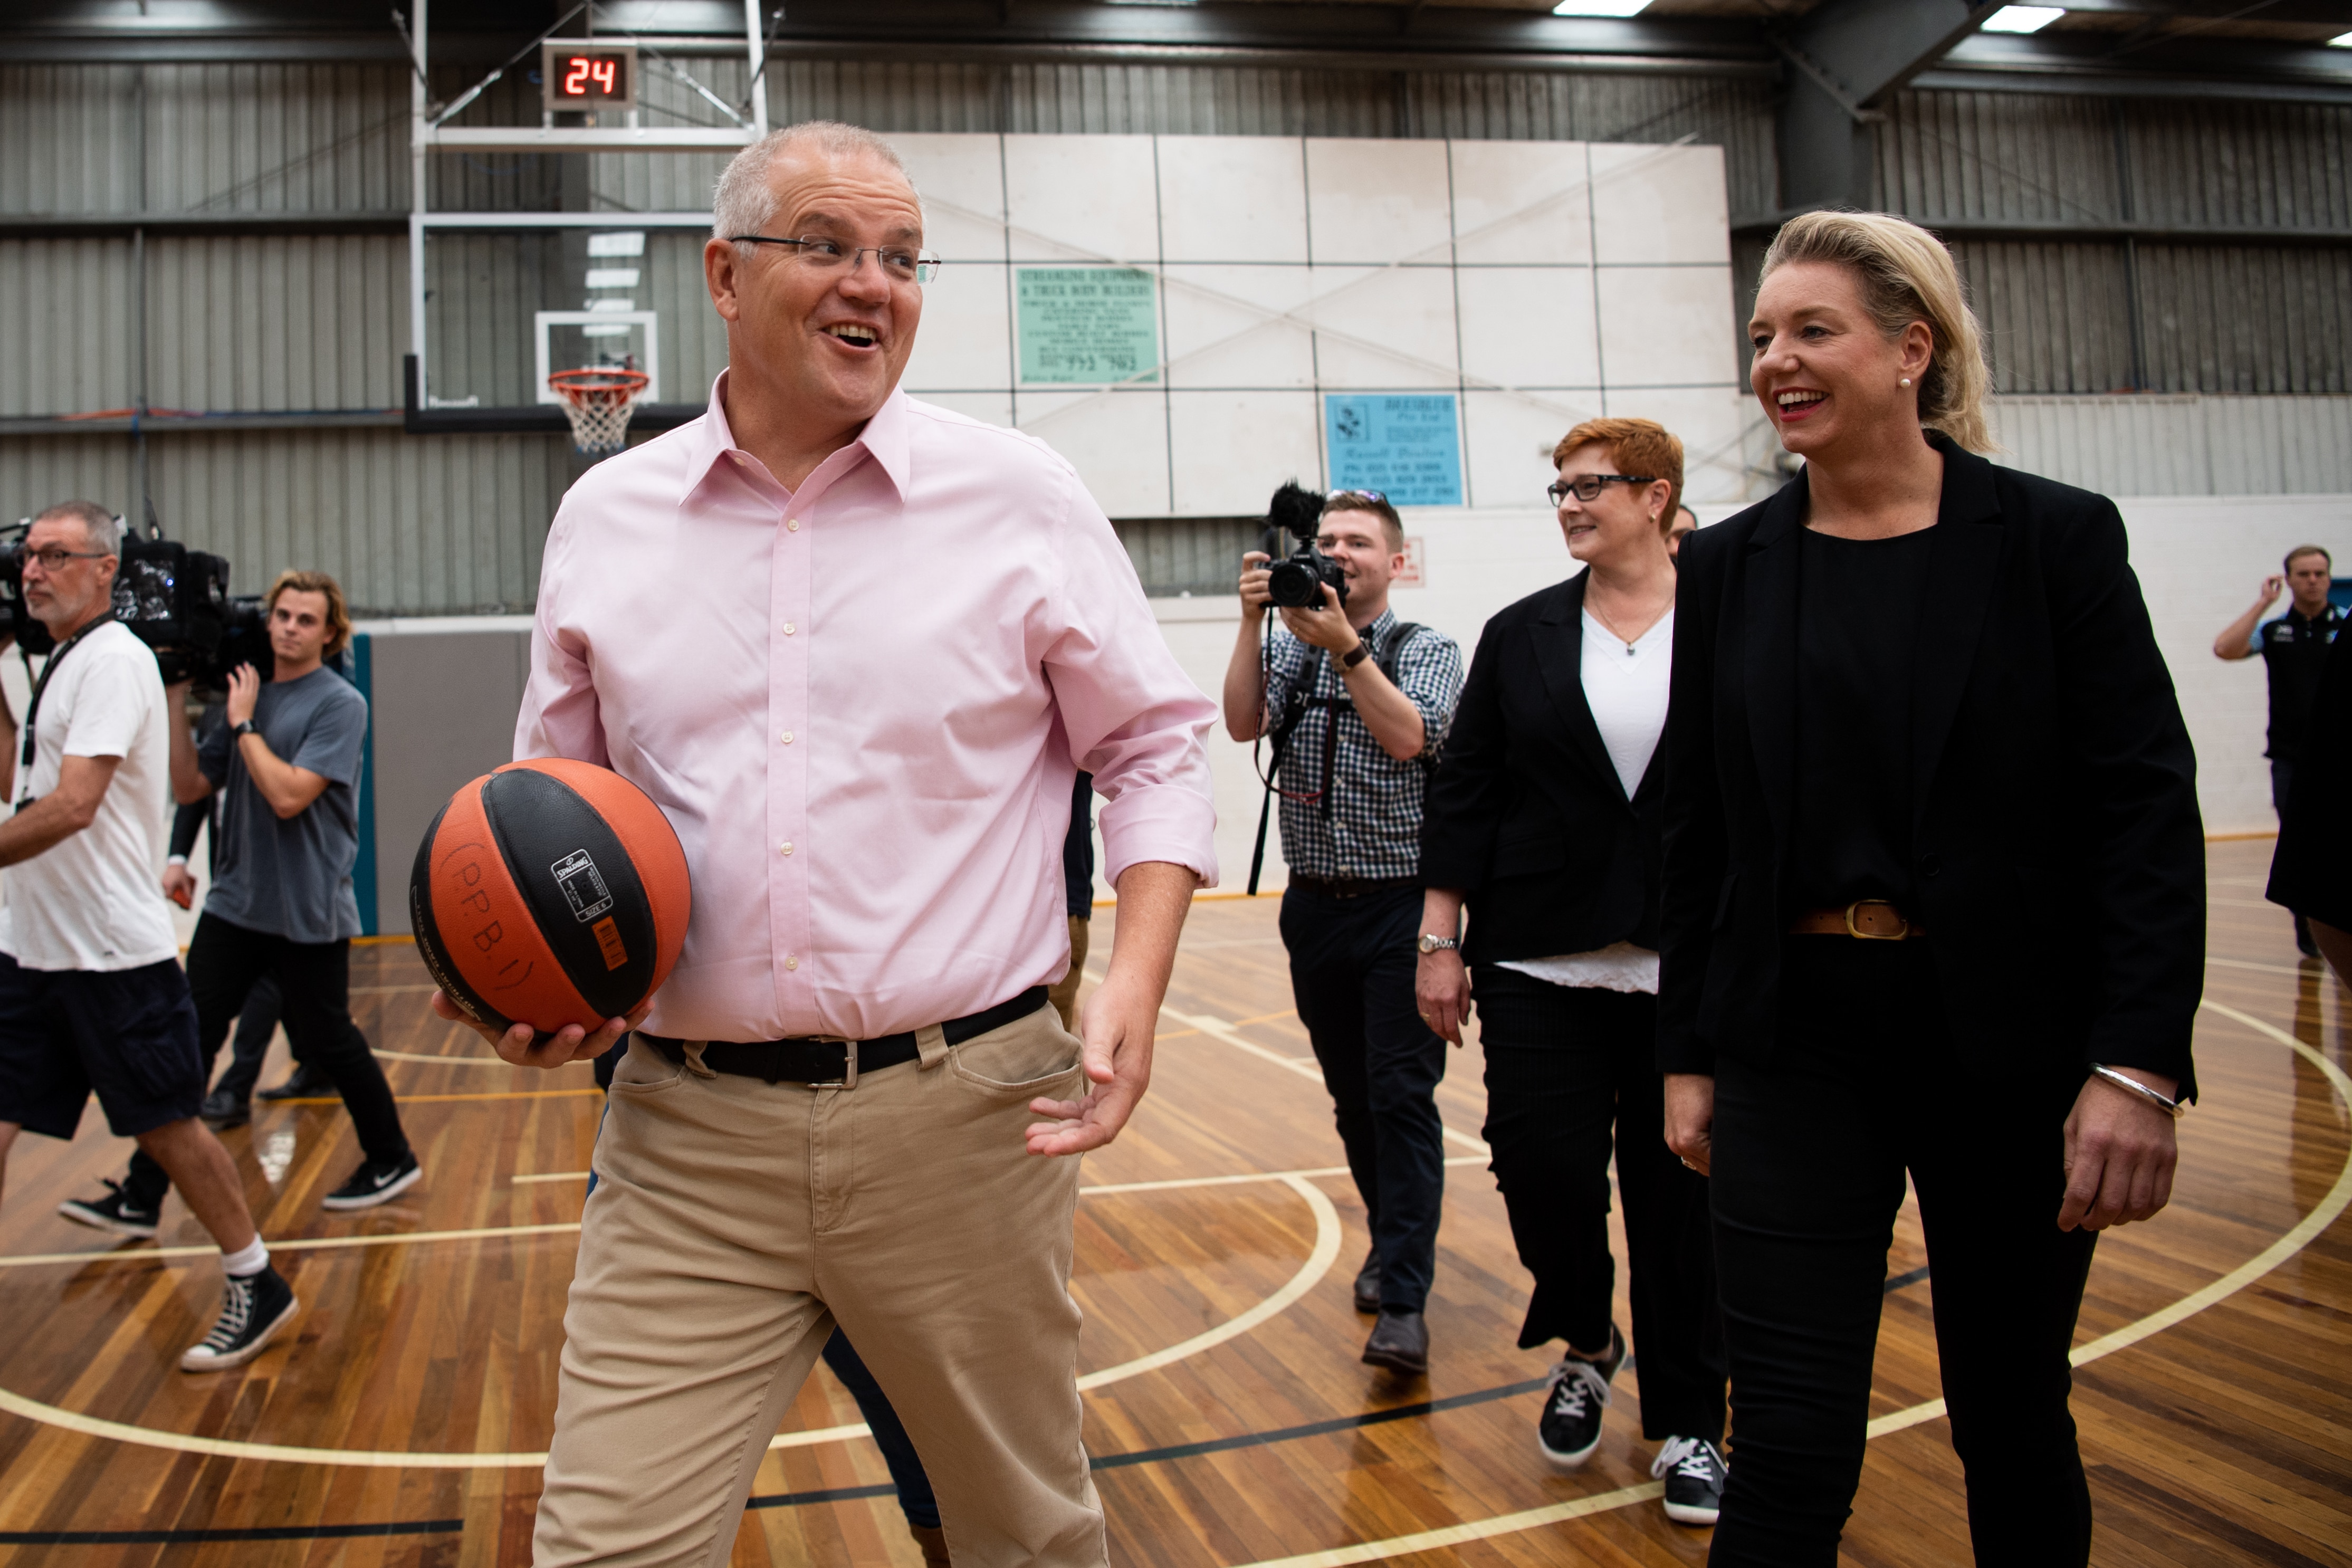 Prime Minister Scott Morrison is seen with then-Minister for Sports Bridget McKenzie.